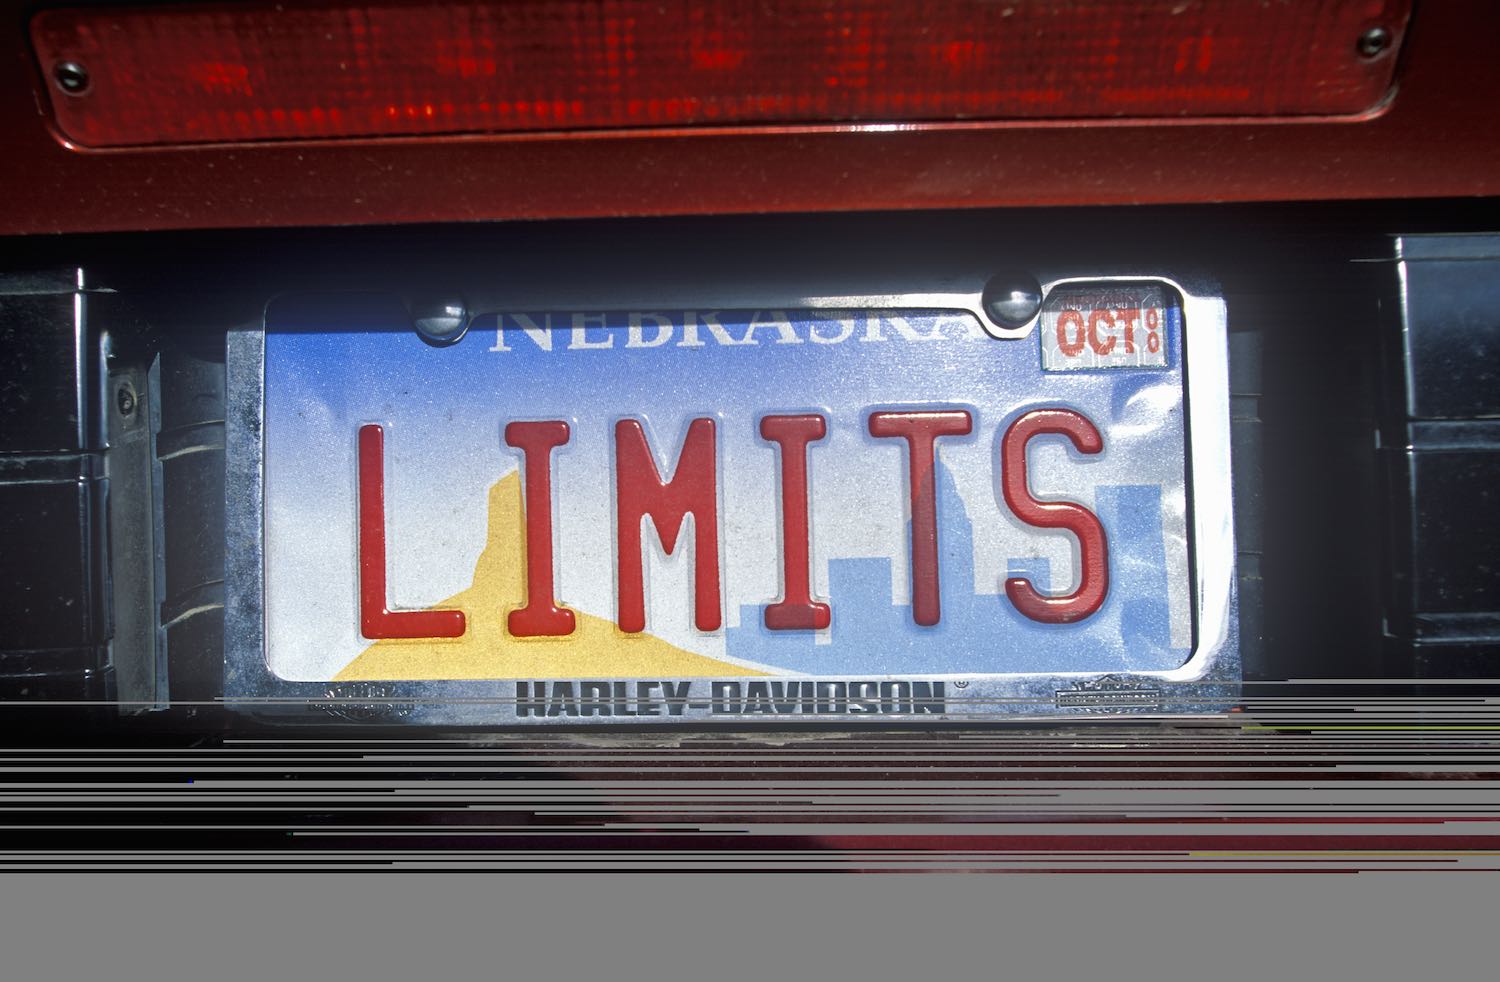 Nebraska Vanity license plate that says "Limits" on the back of a red car.